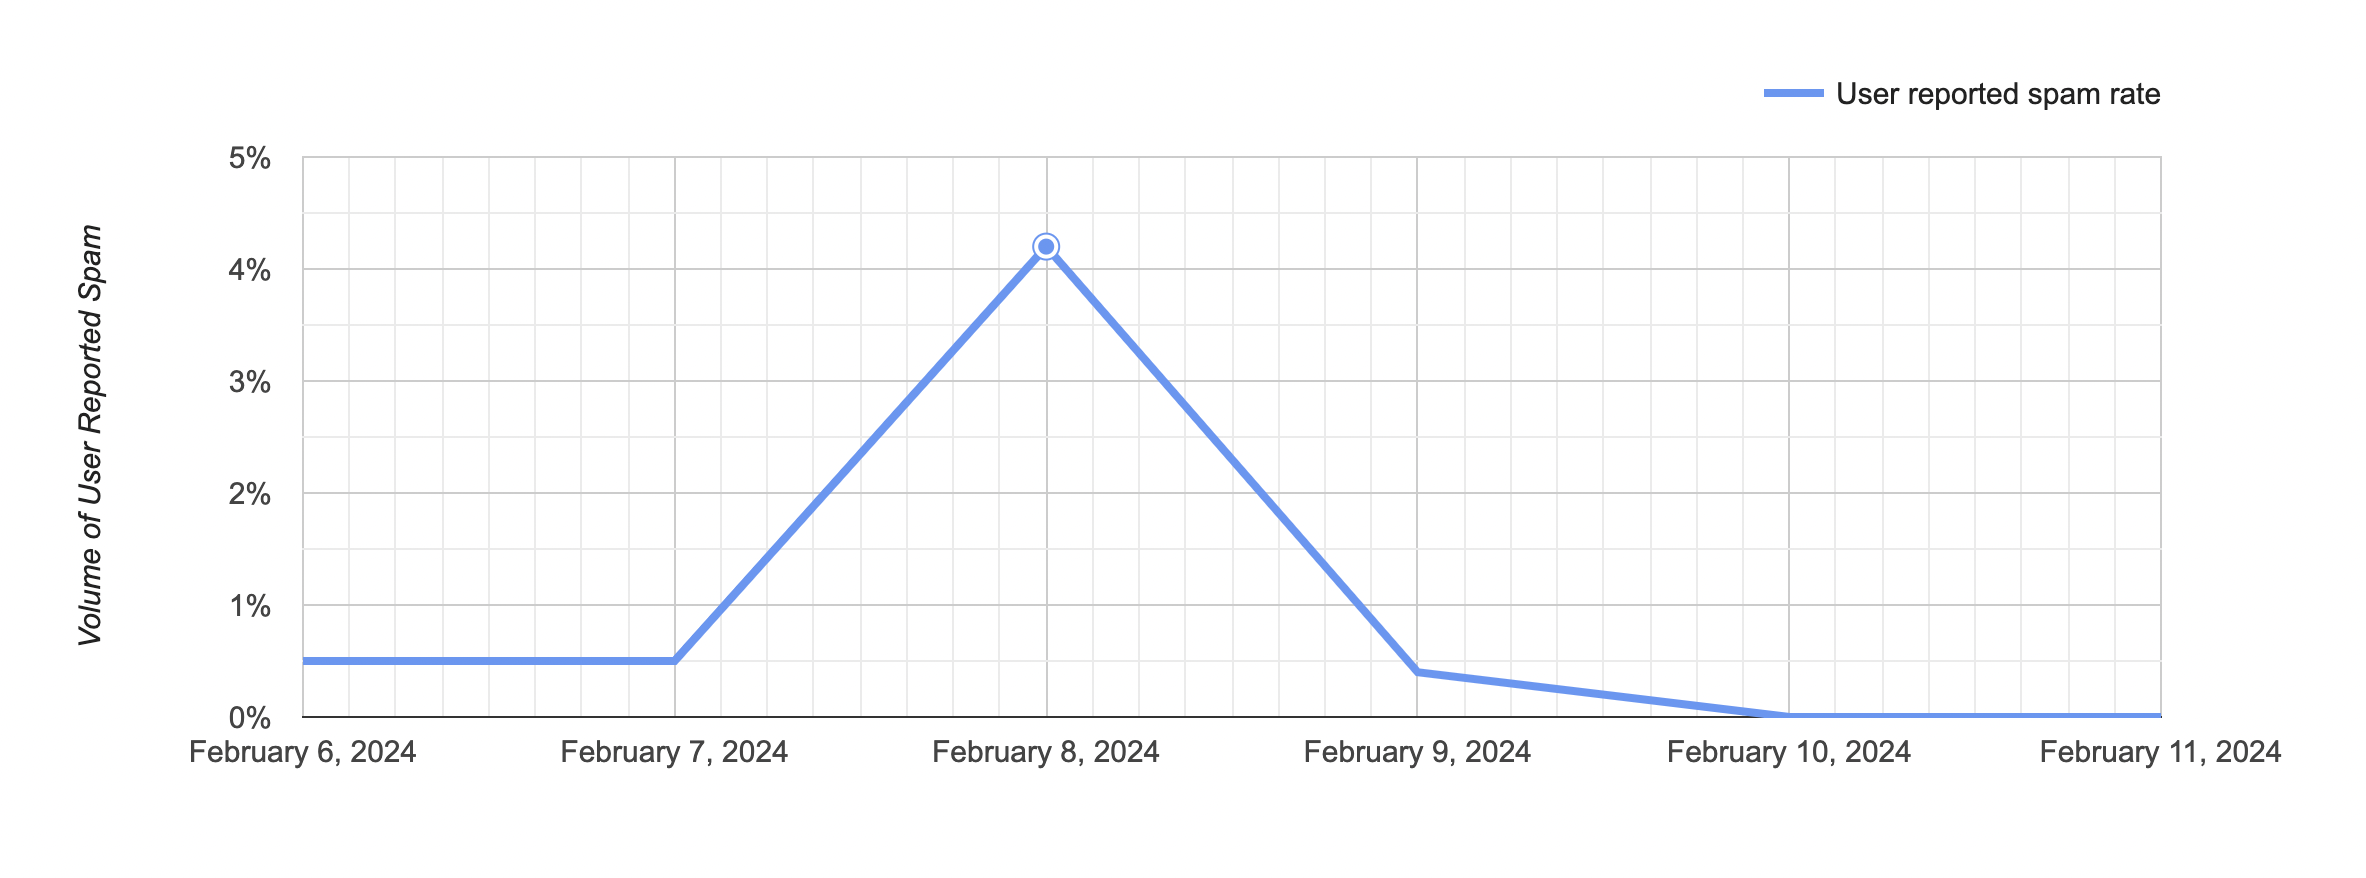 A graph with some spam rate data